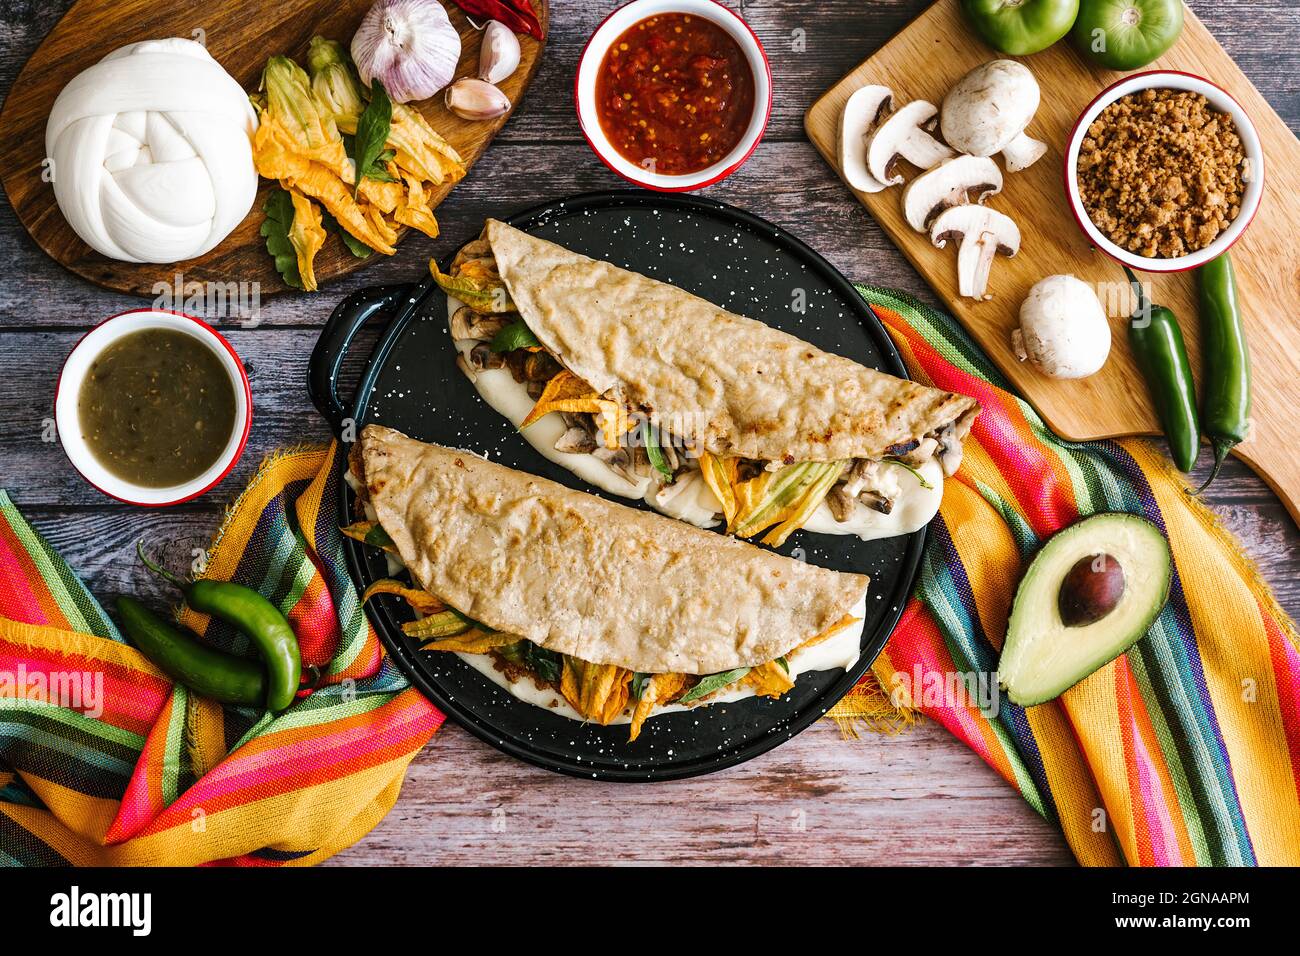 Making Quesadillas In Mexican Comal Stock Photo - Download Image